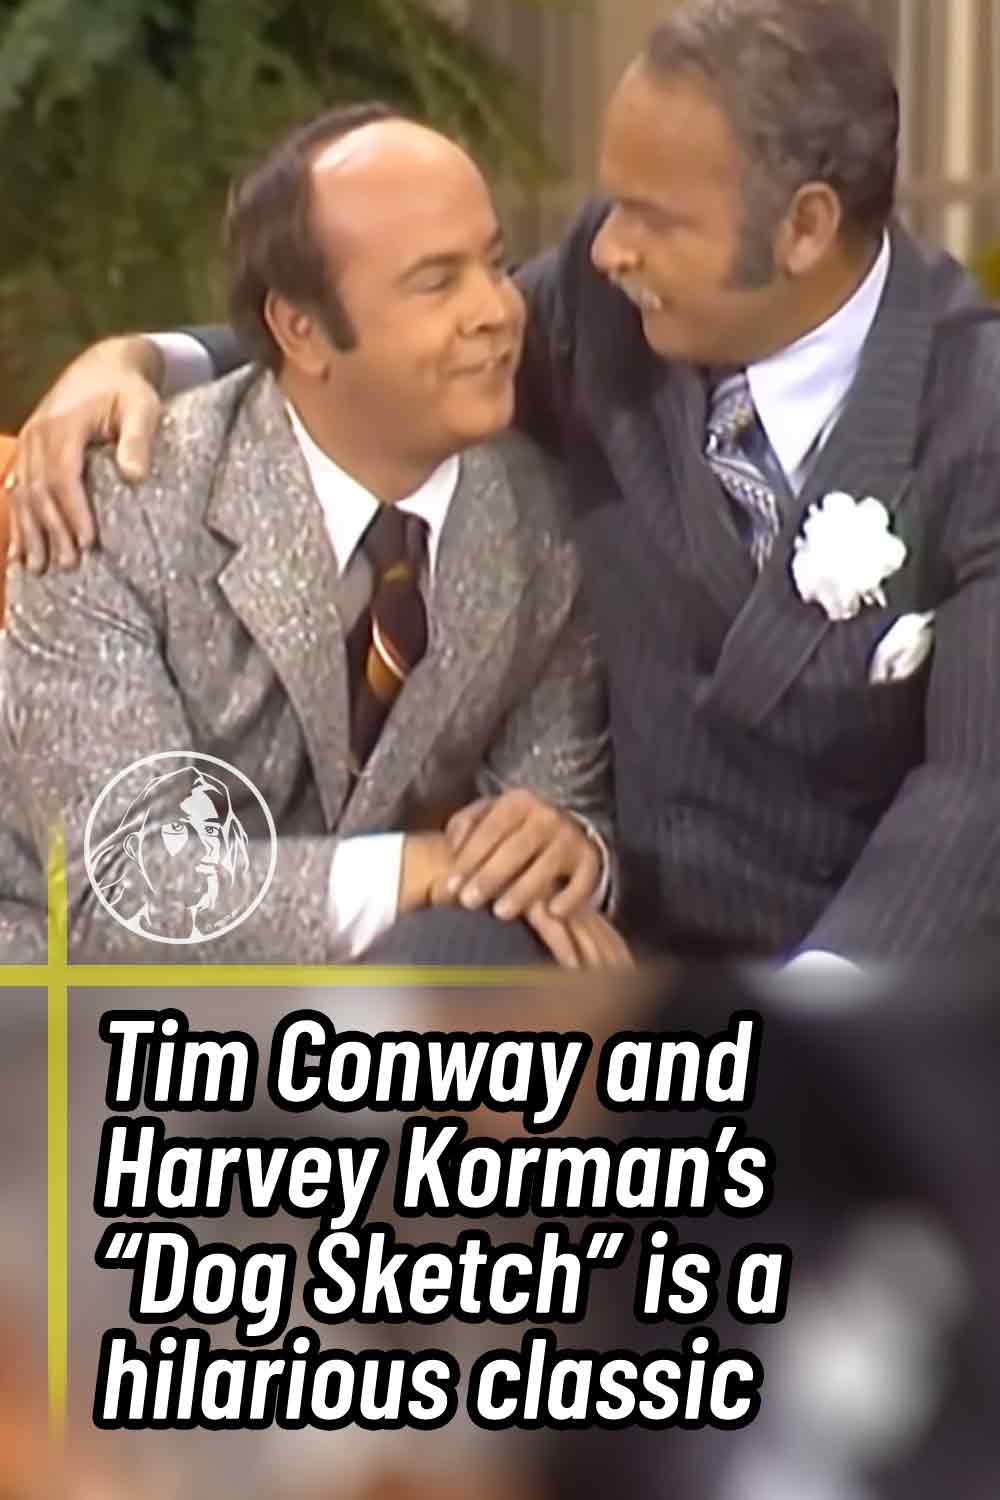 Tim Conway and Harvey Korman’s “Dog Sketch” is a hilarious classic